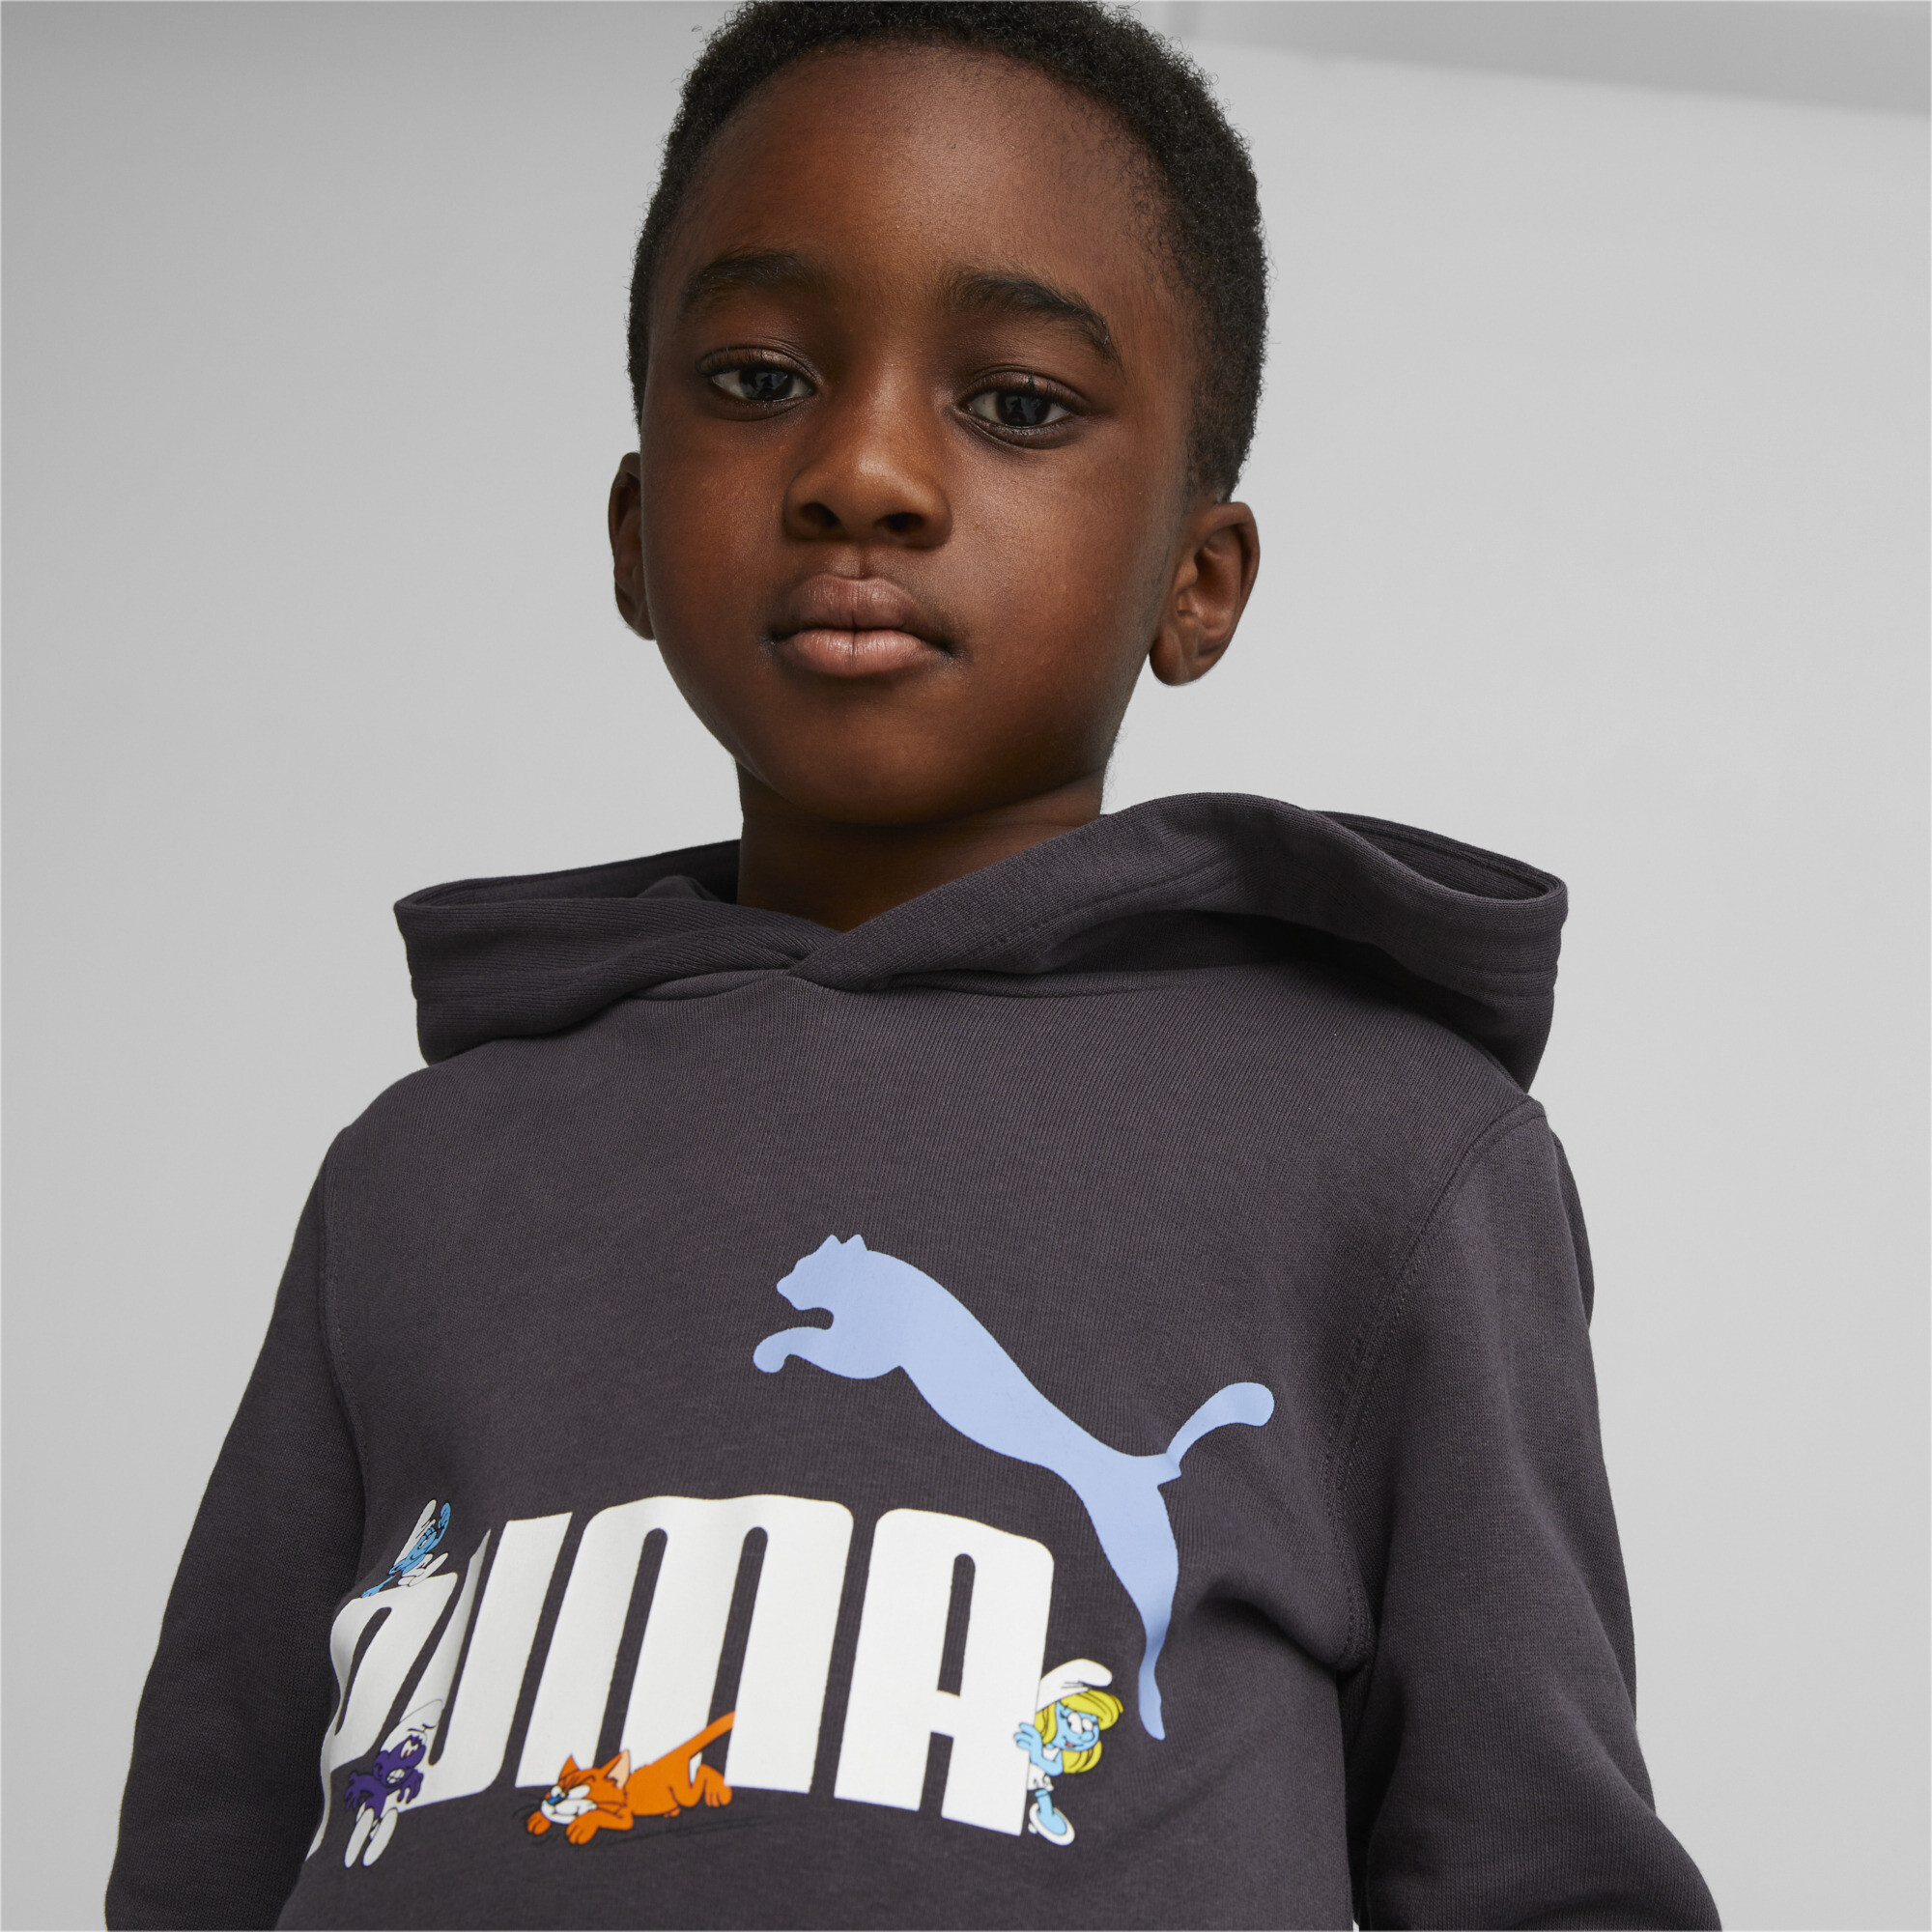 PUMA X THE SMURFS Hoodie In Gray, Size 7-8 Youth